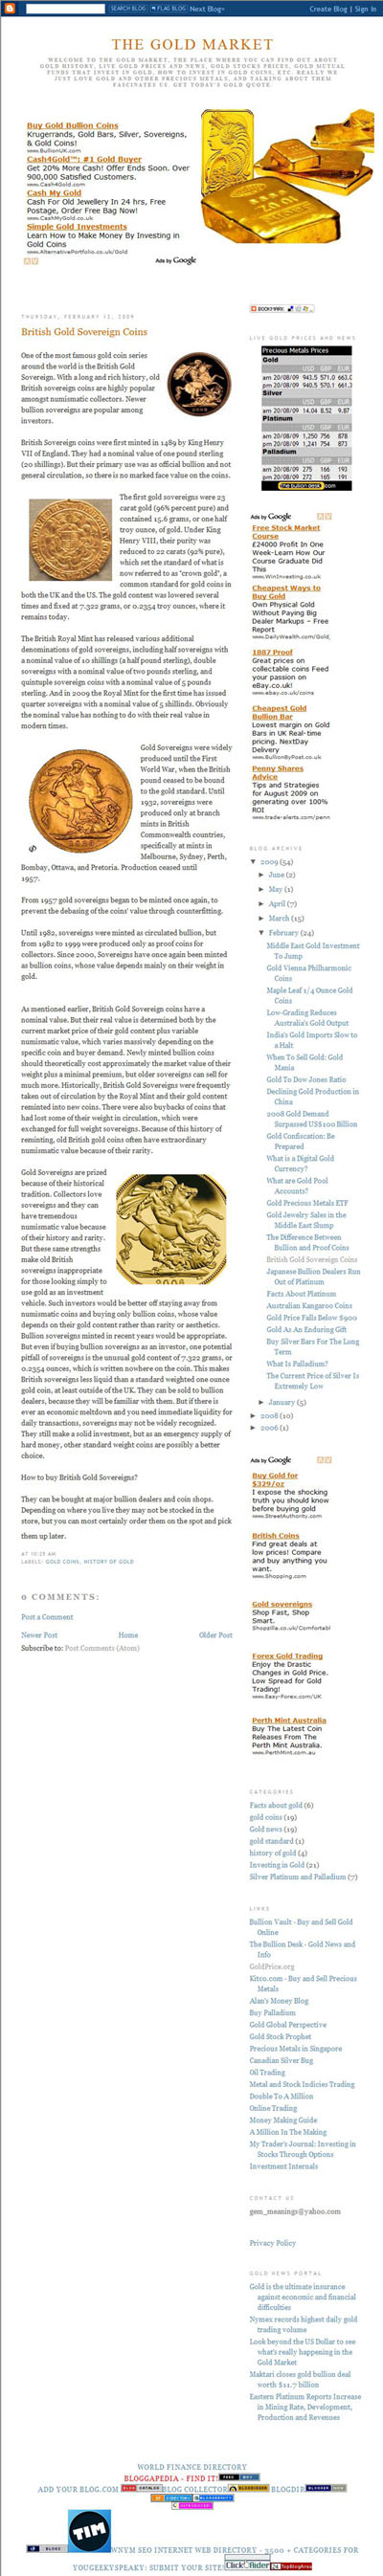 The Gold Market the-gold-market.blogspot.com Gold Sovereigns Page